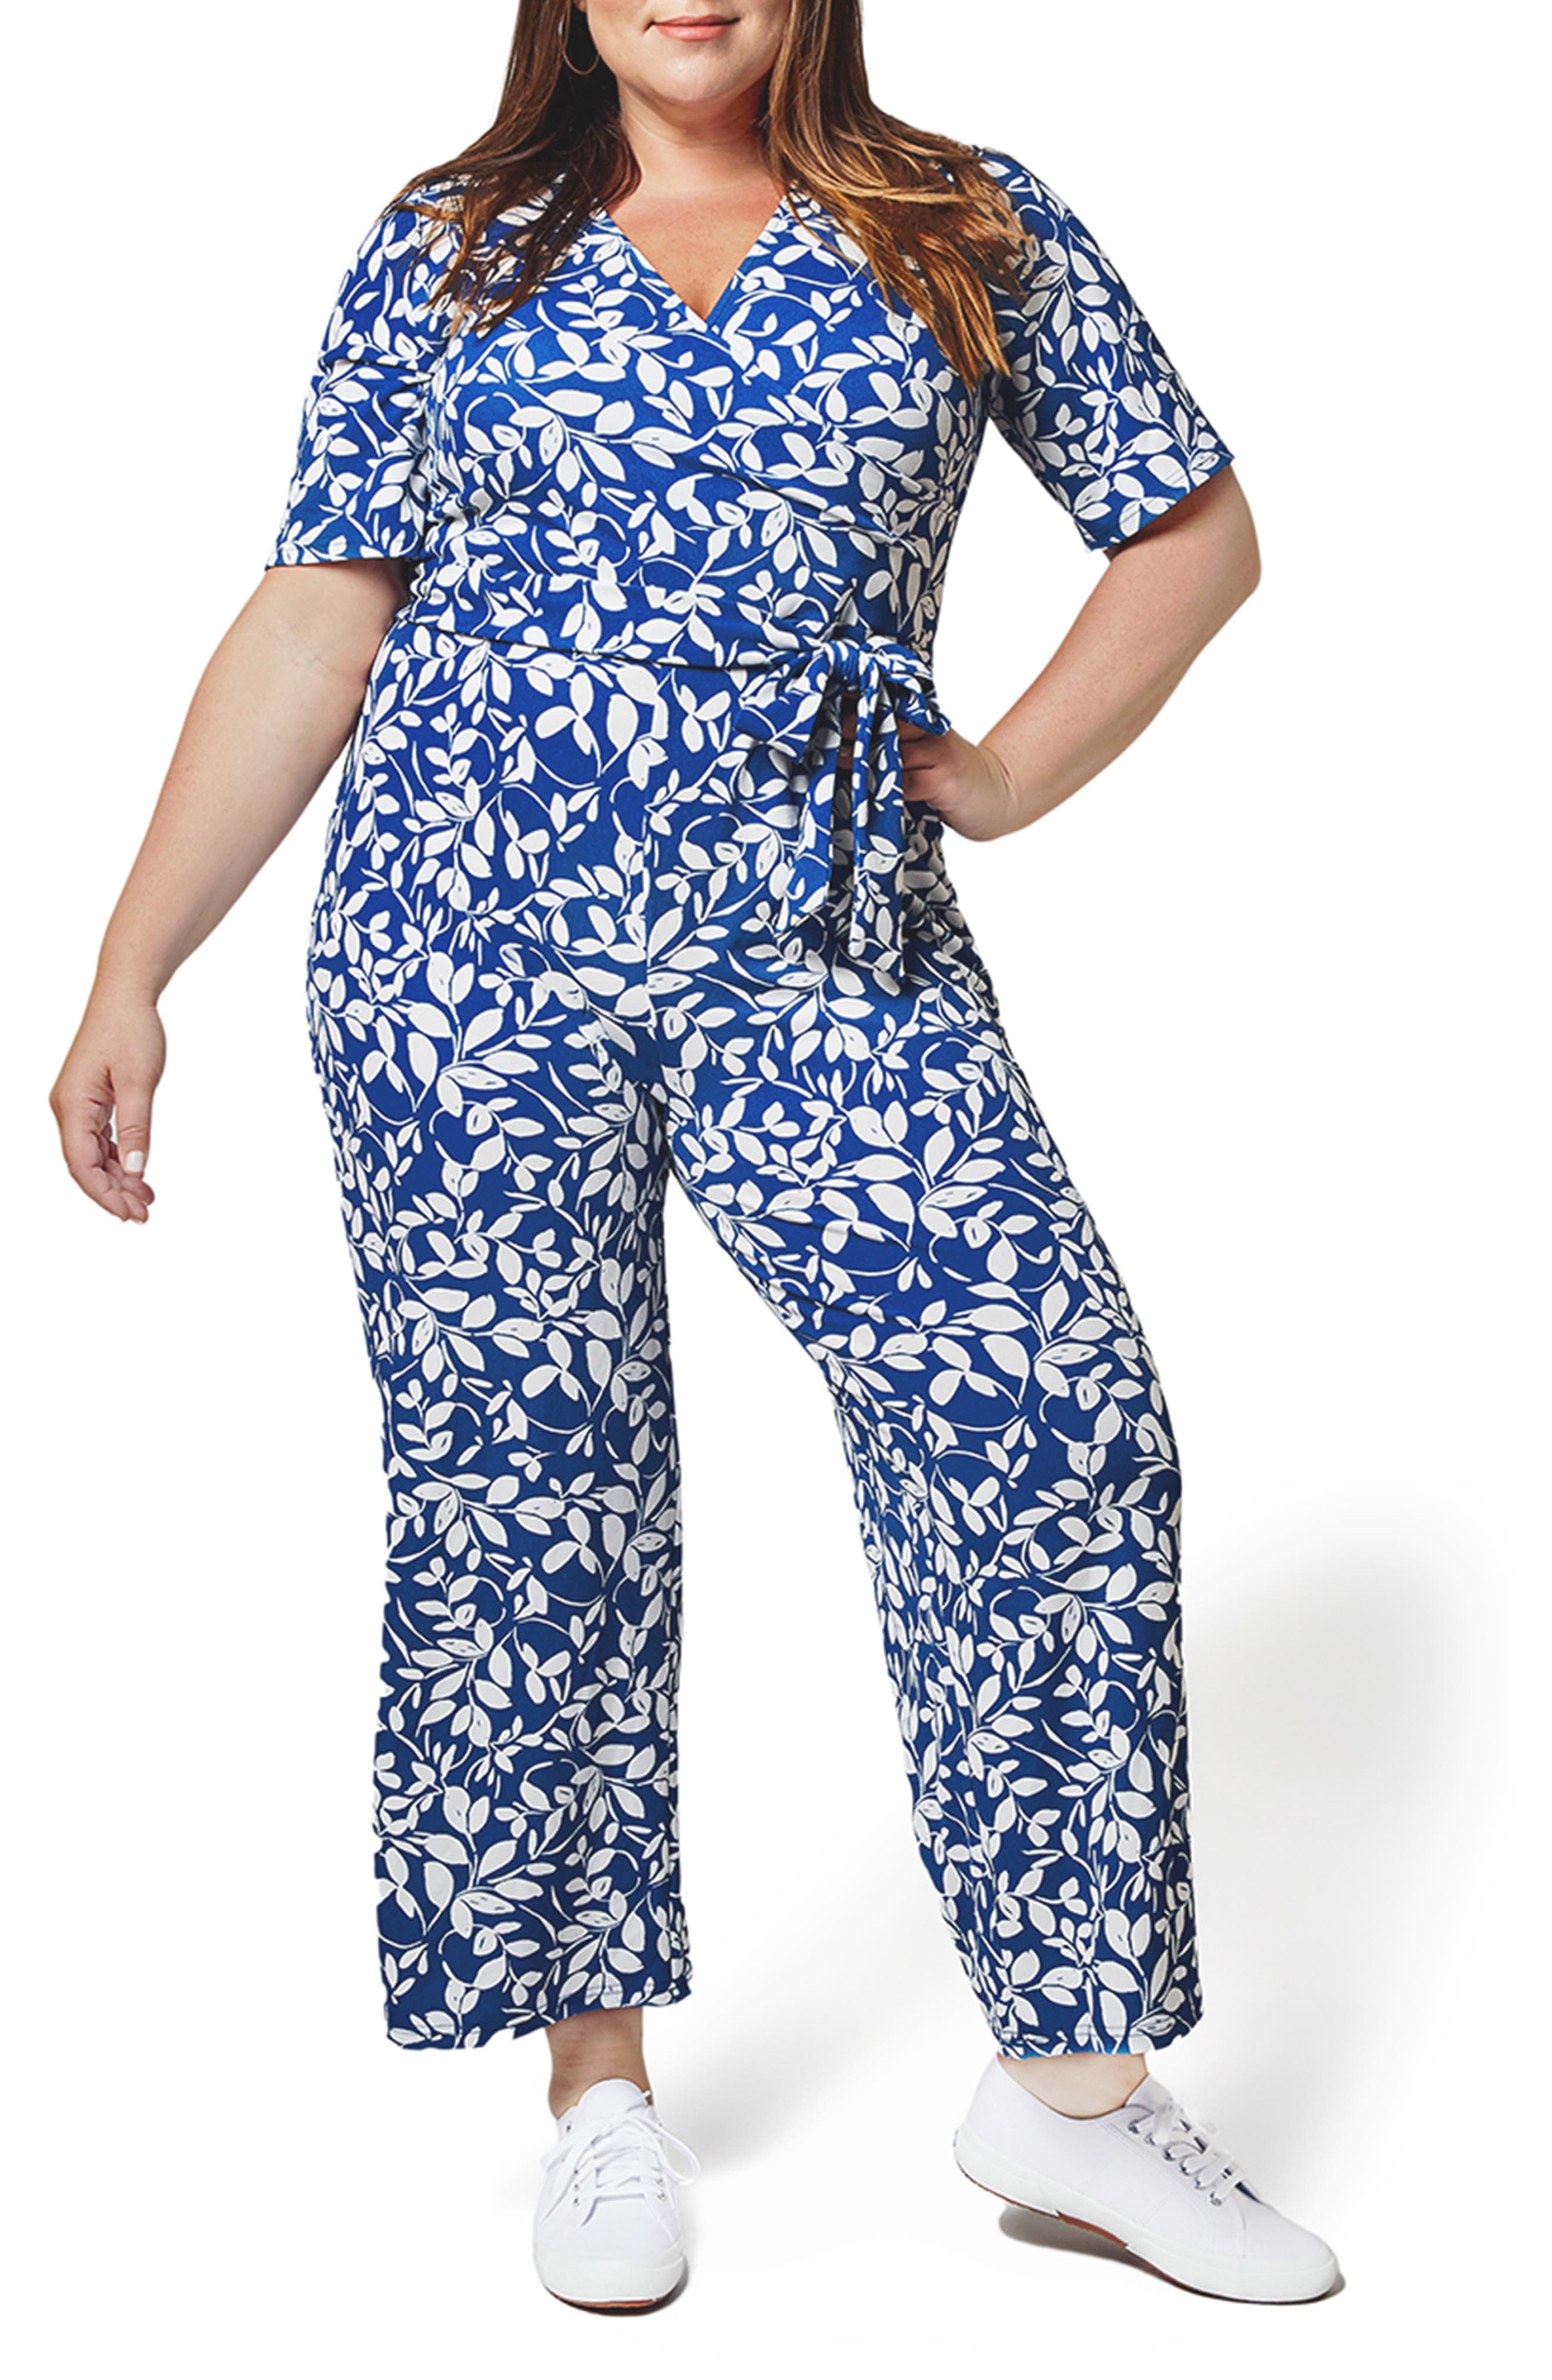 Leota Kayla Jumpsuit in Two Tone Floral Set Sail at Nordstrom